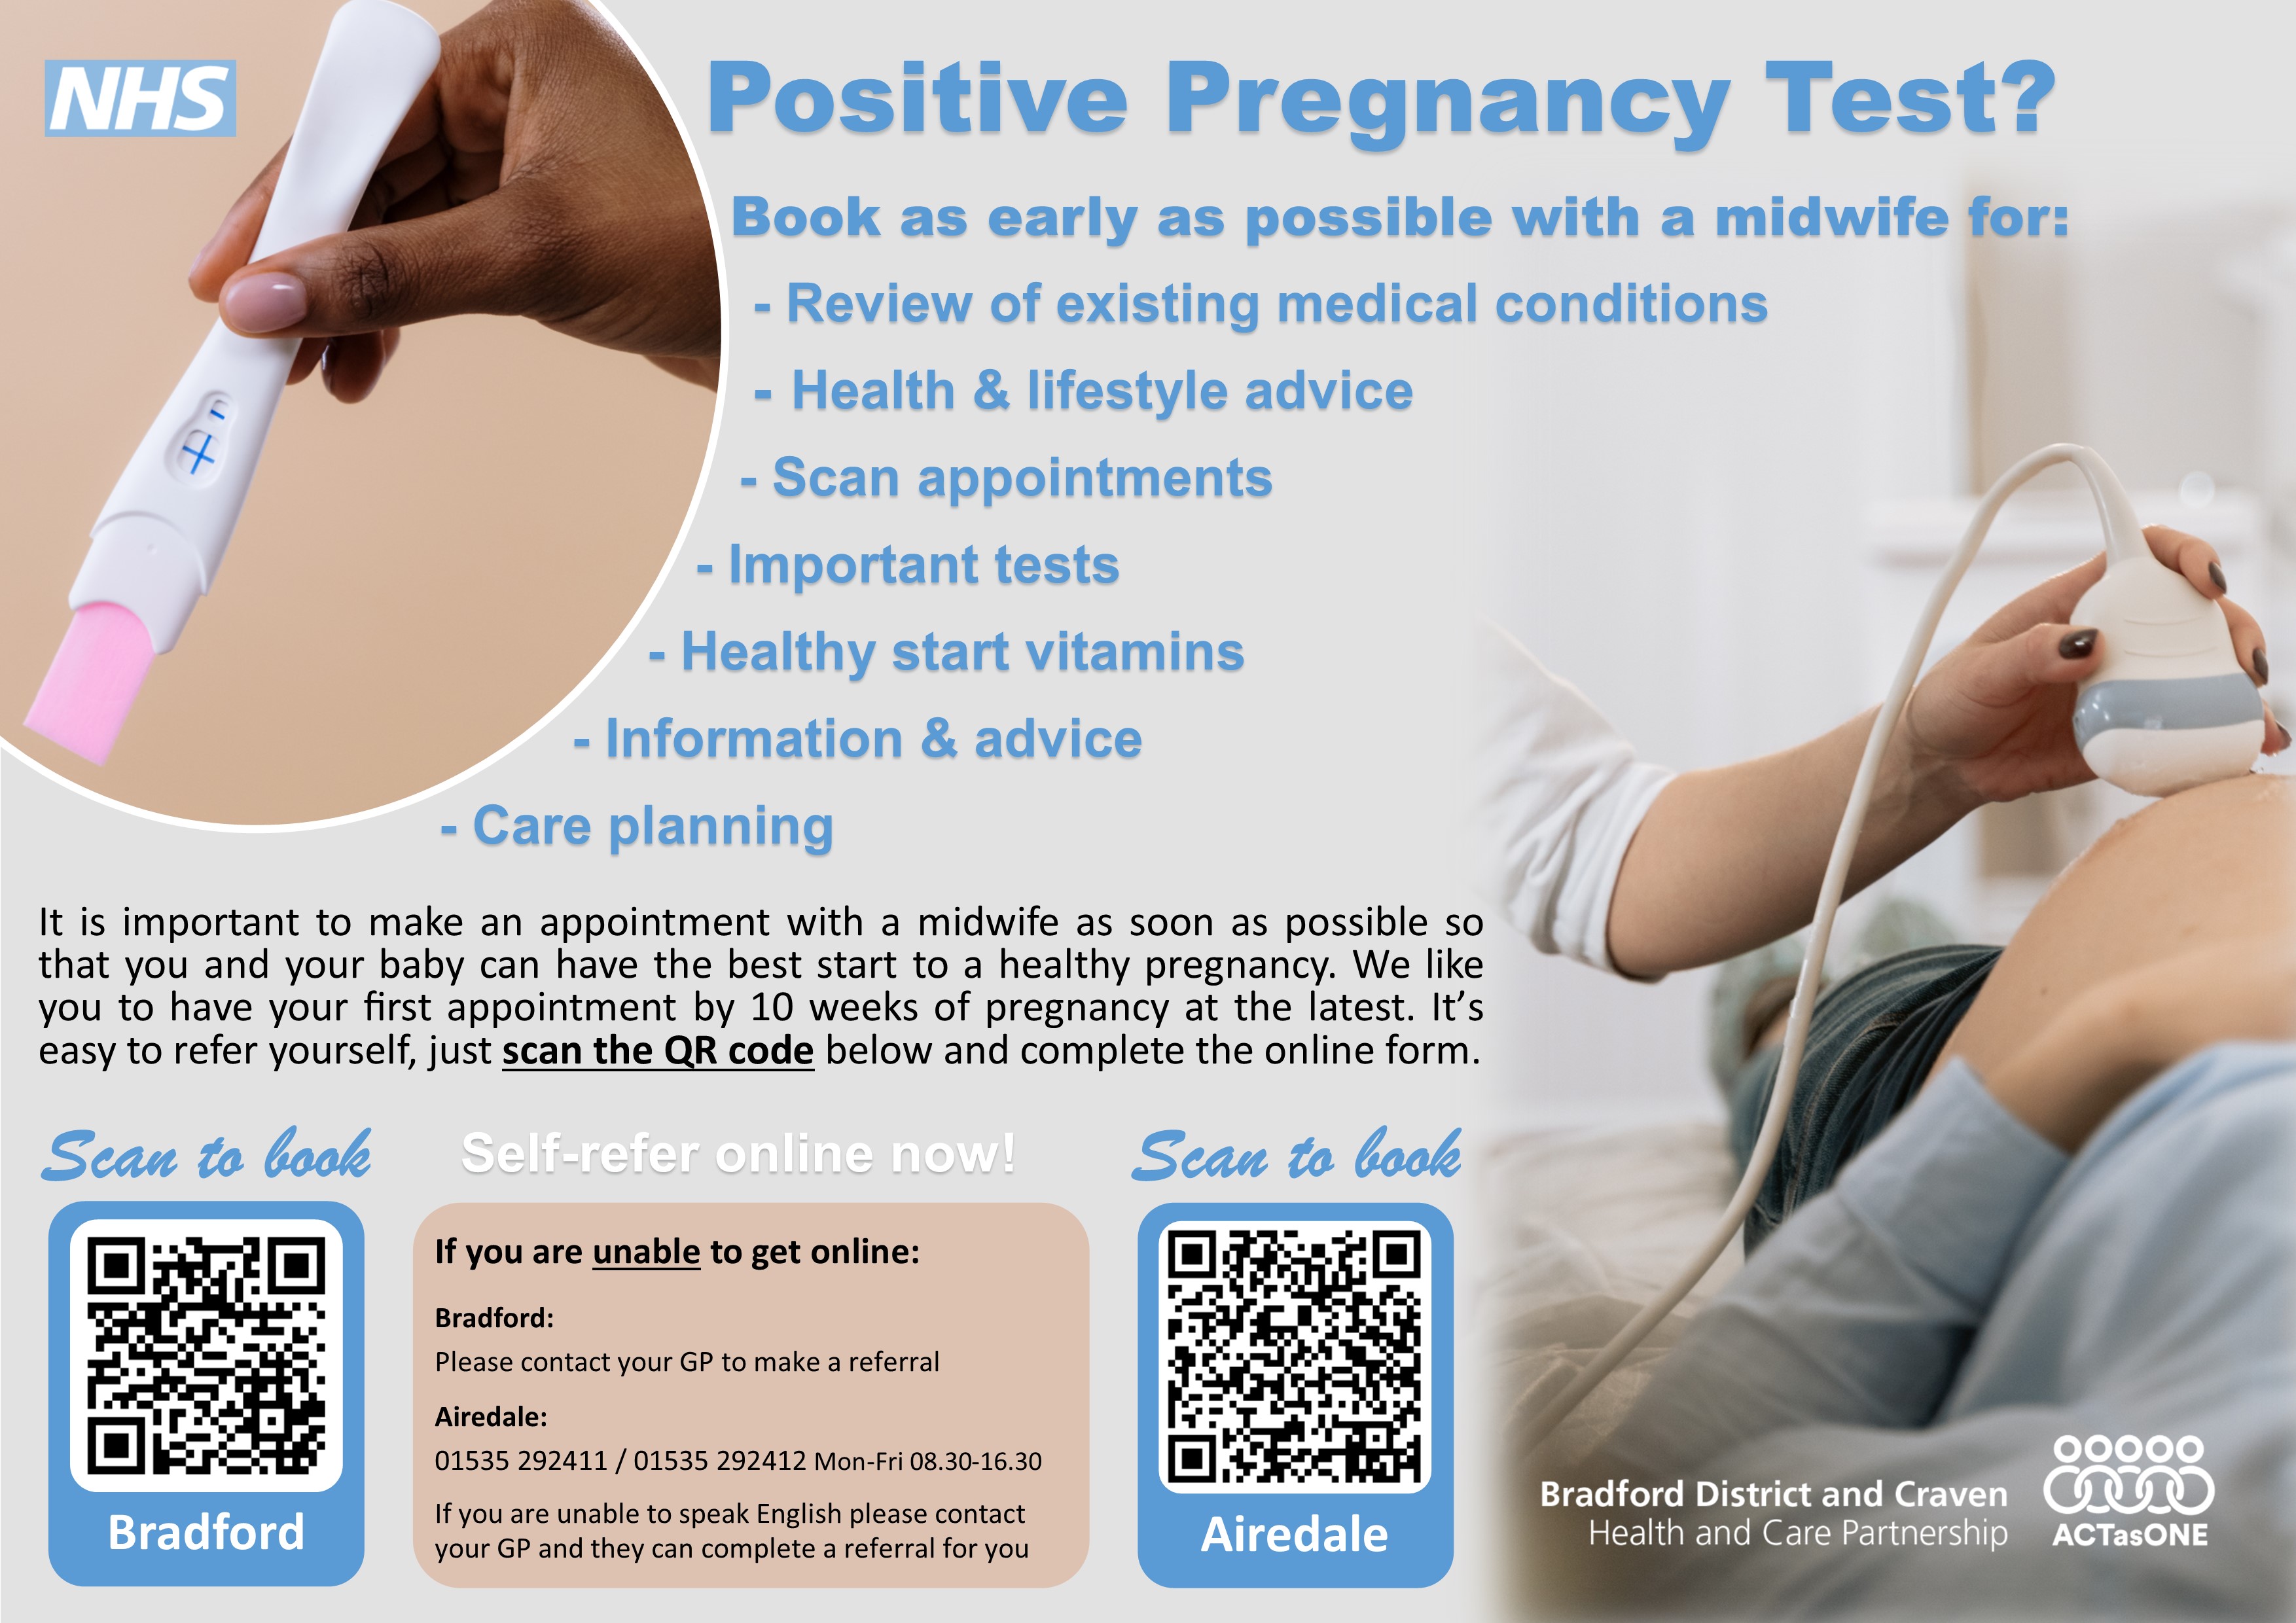 Newly pregnancy? Book your first appointment early